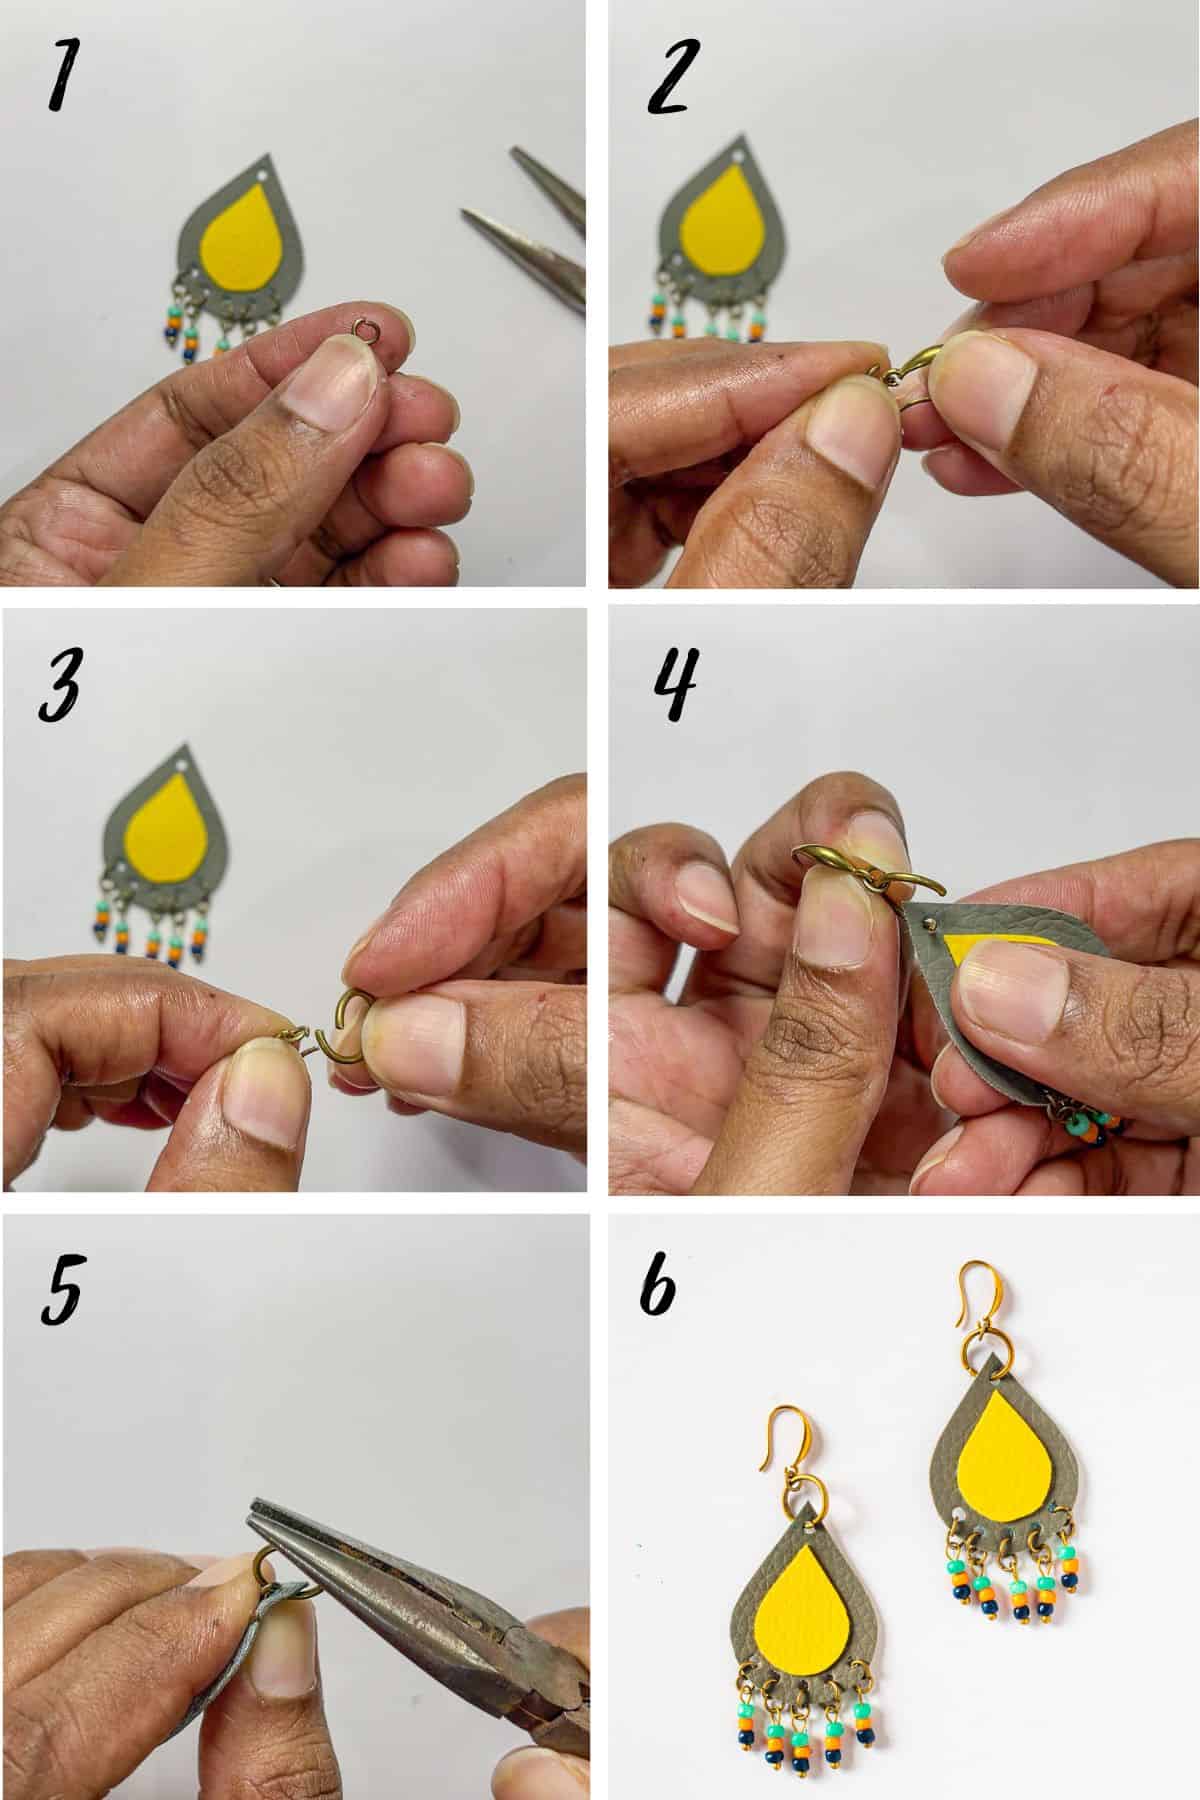 A poster of 6 images showing how to attach earring hooks.